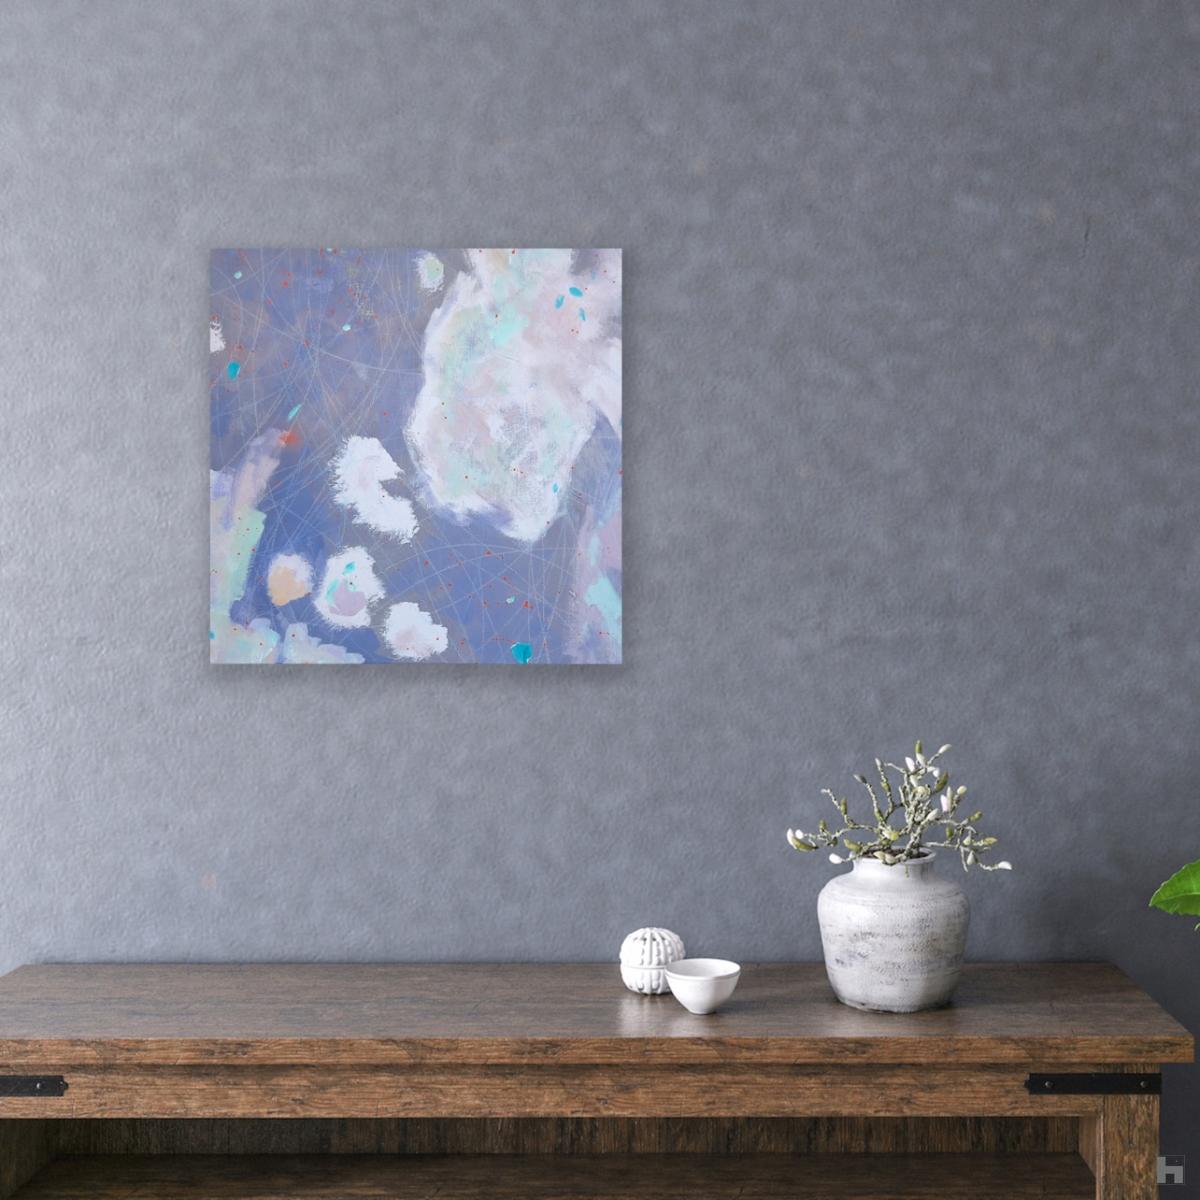 An abstract painting in soft greys hanging on a wall above a table